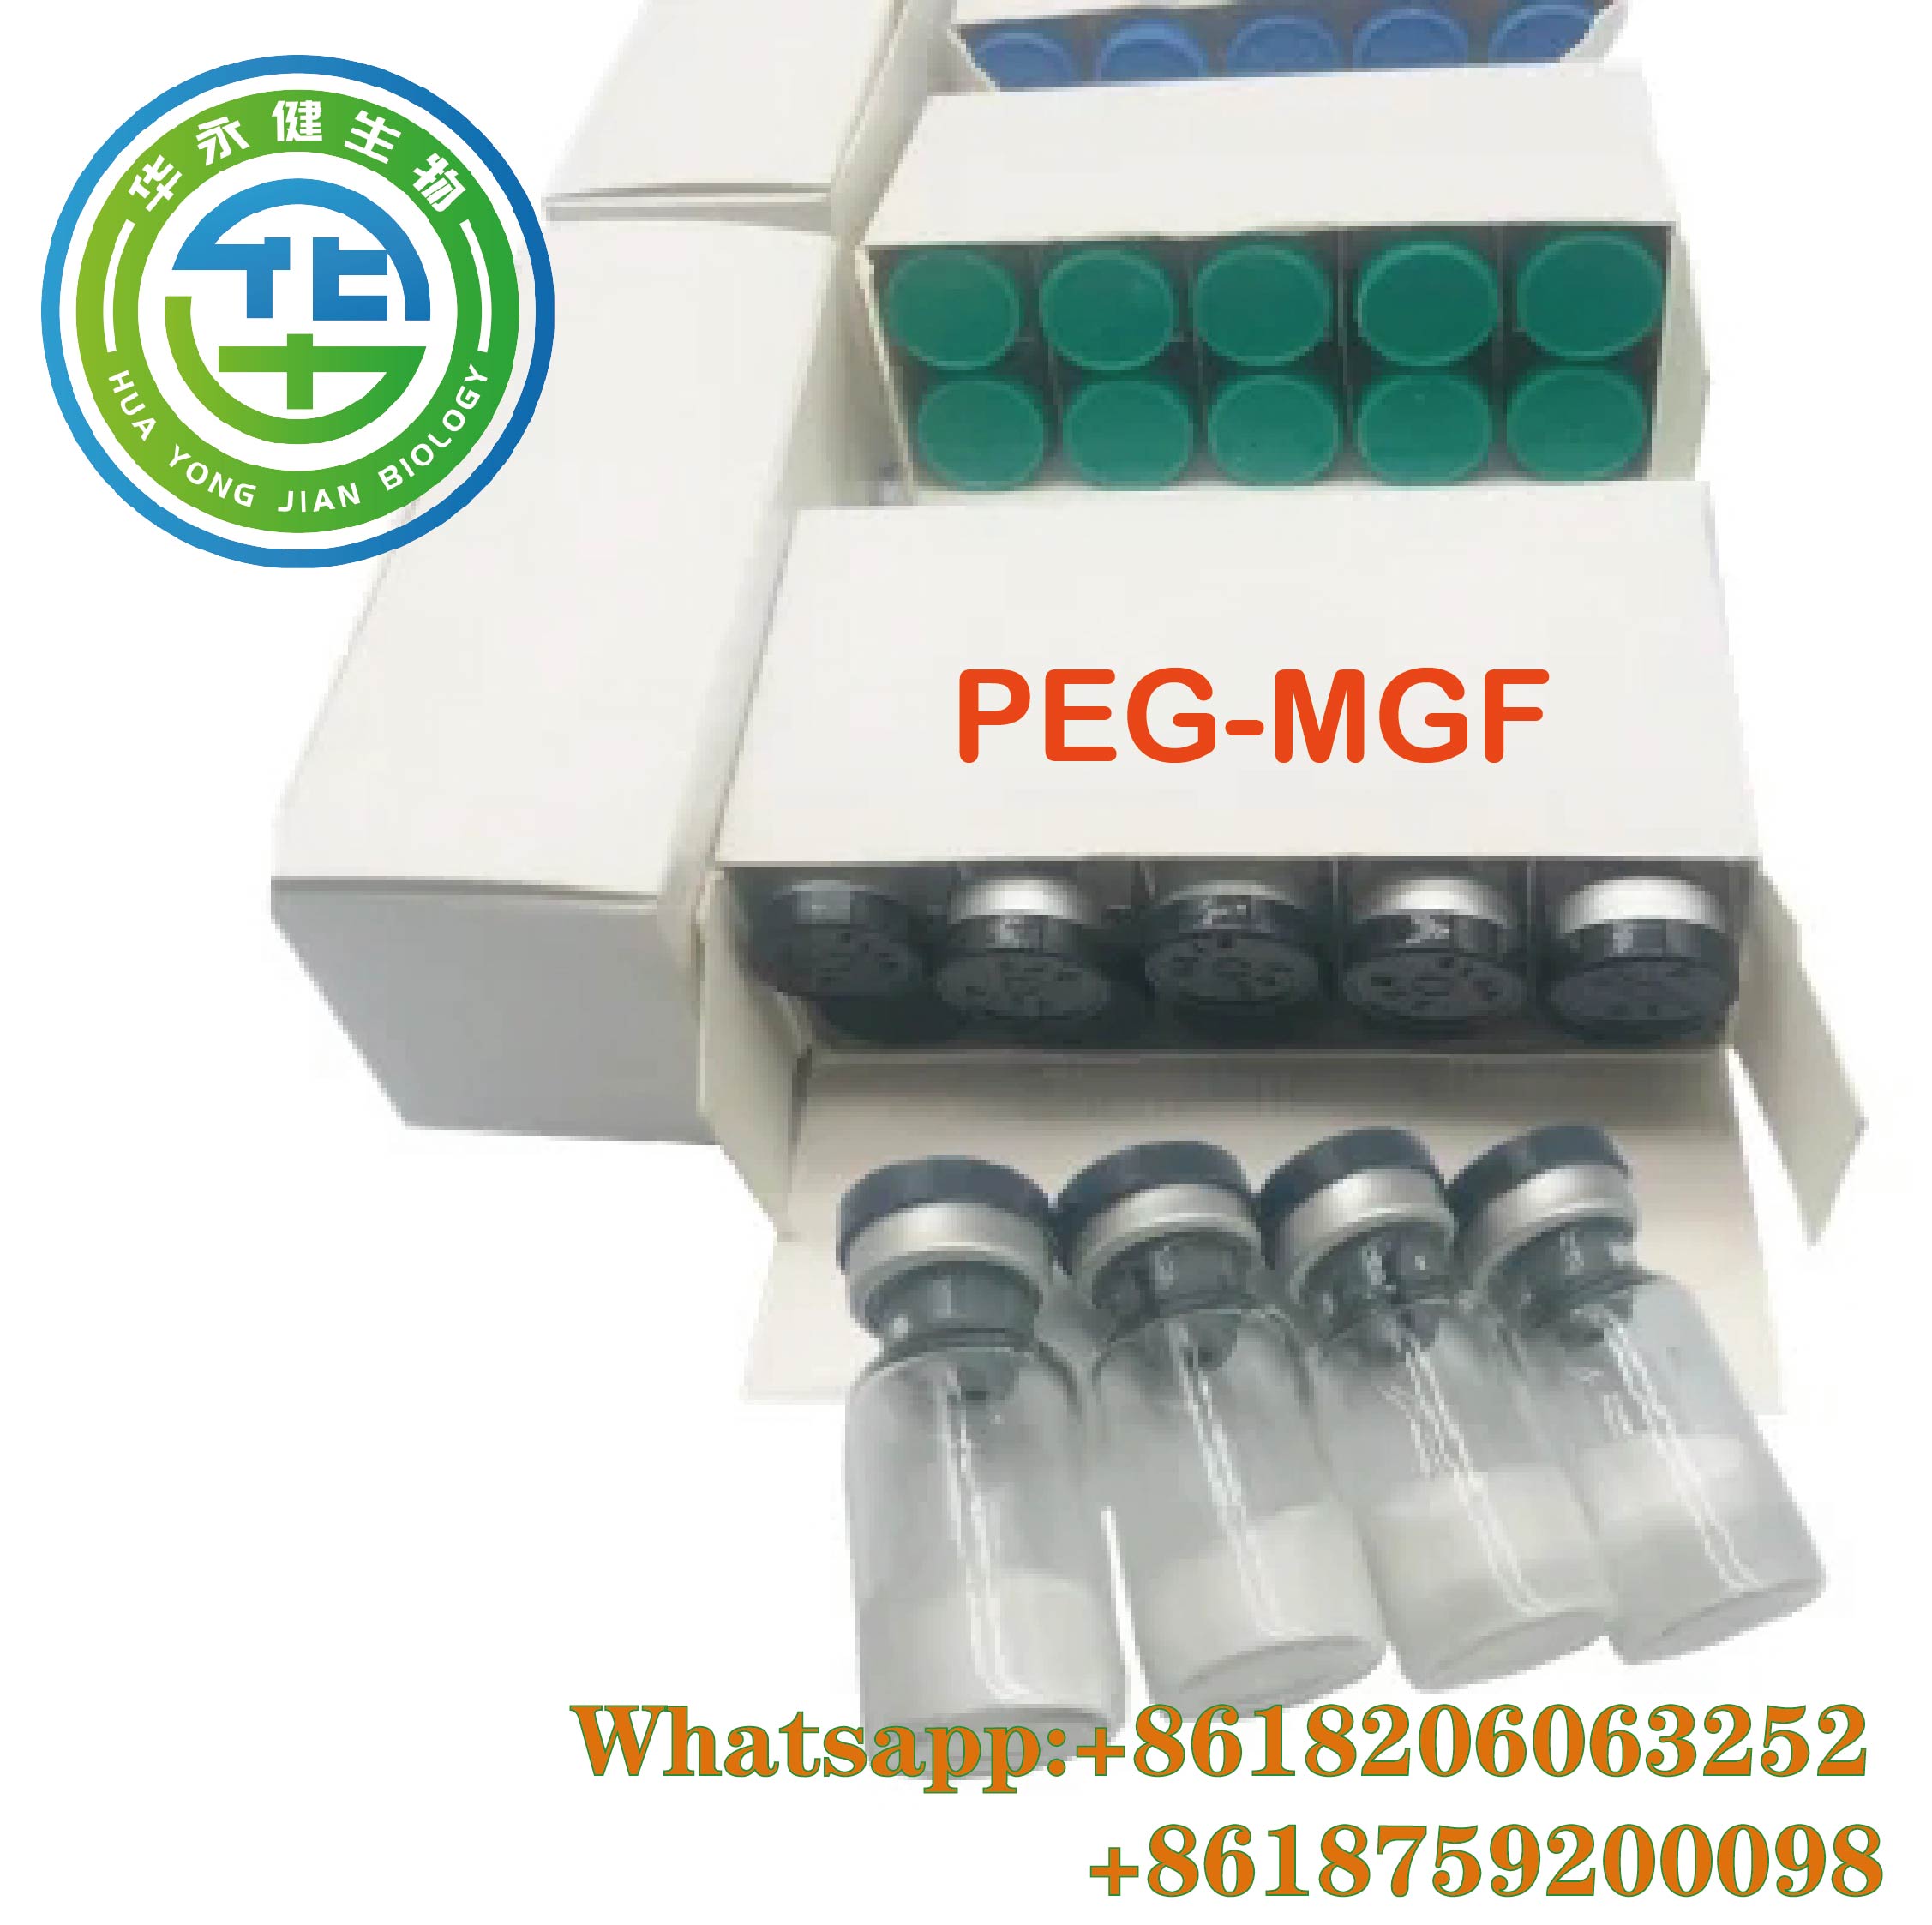 PEG-MGF Steroids Hormone Raw Powder Muscle Building Best Quality Selank Peptides America Shipping Guaranteed